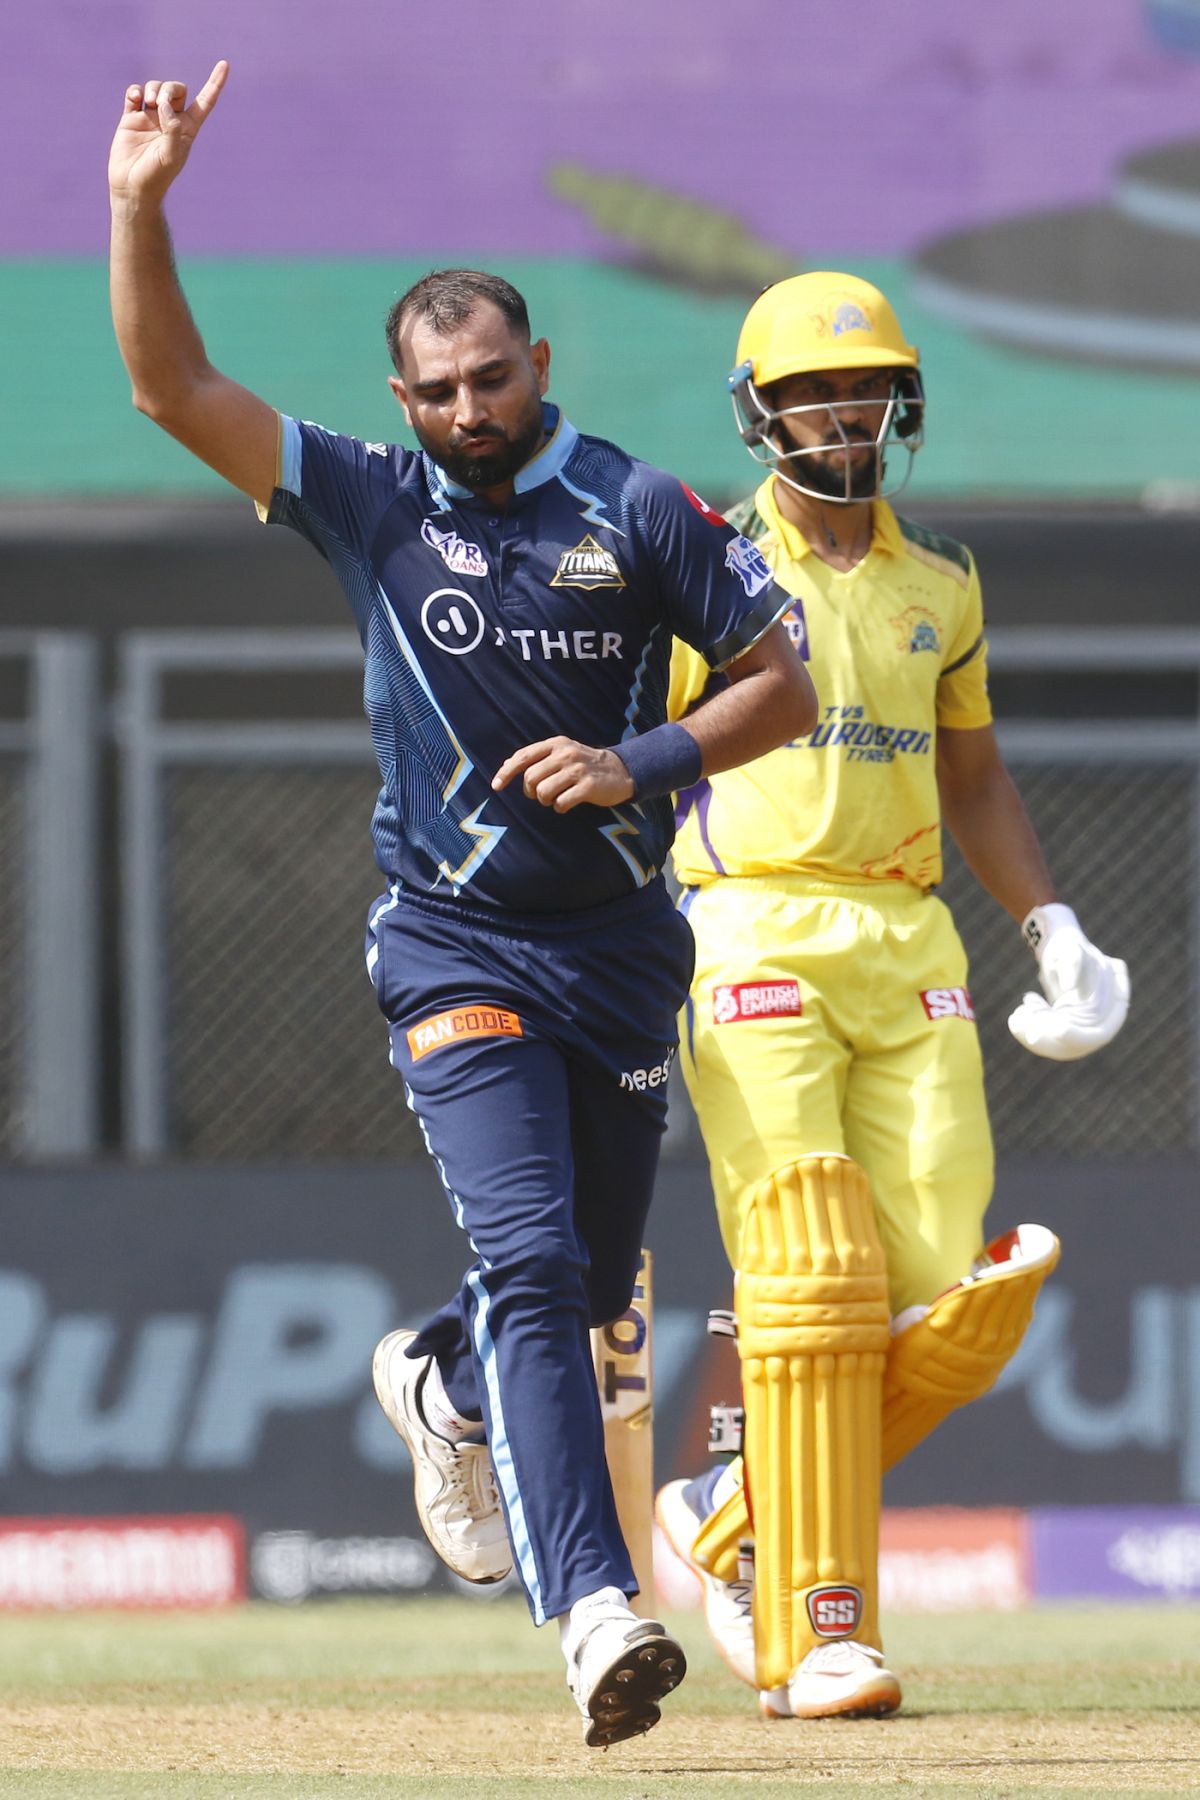 Mohammed Shami picked up his 11th powerplay wicket of the season when he removed Devon Conway, Chennai Super Kings vs Gujarat Titans, IPL 2022, Wankhede Stadium, Mumbai, May 15, 2022